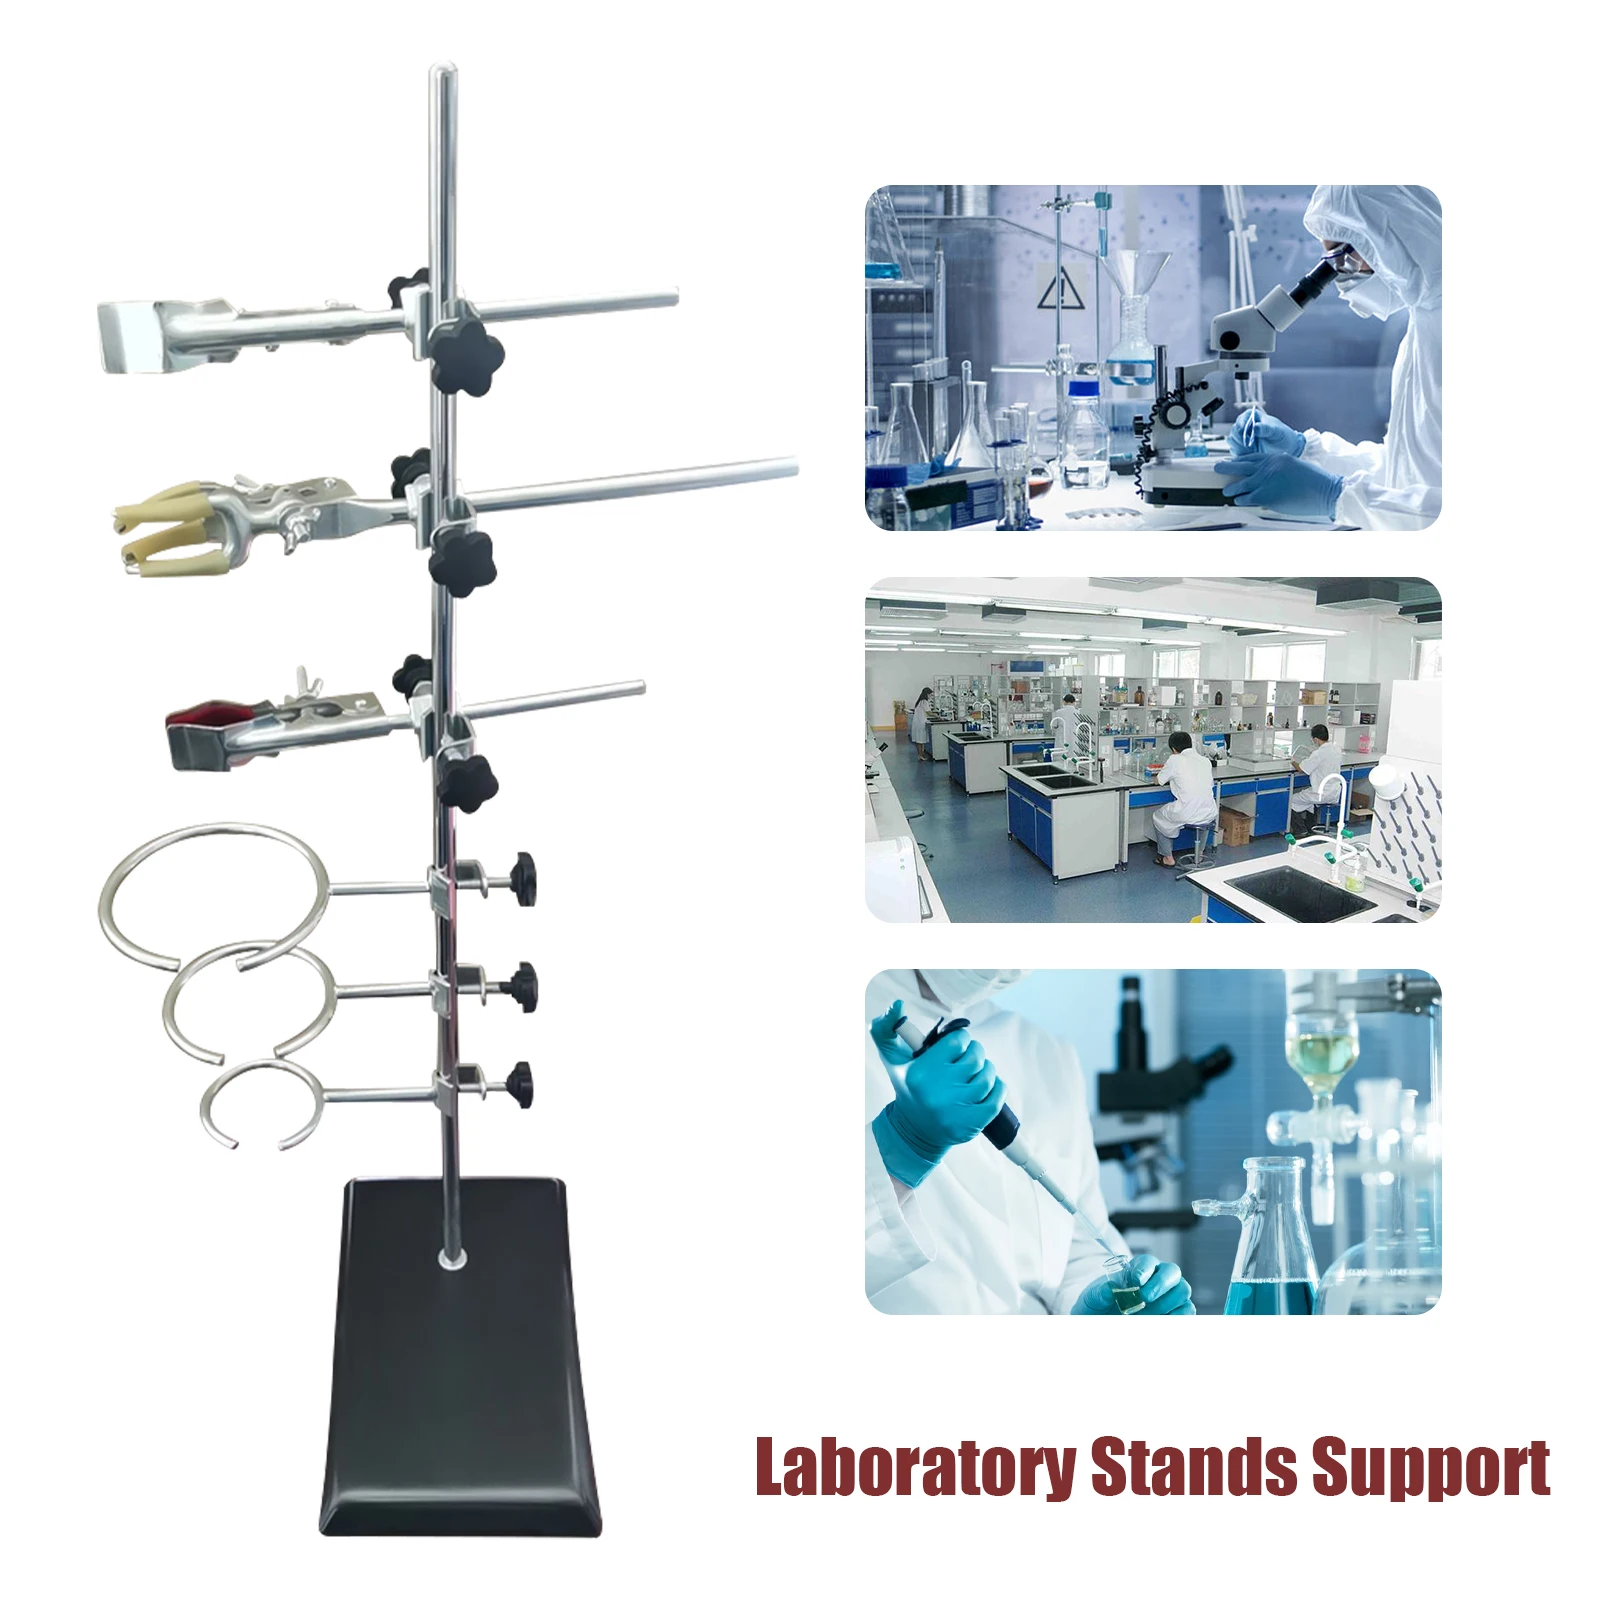 Laboratory Stands Support and Lab Clamp Flask Clamp Condenser Clamp Stands 600mm 52cm lab laboratory retort stands support clamp flask platform set height